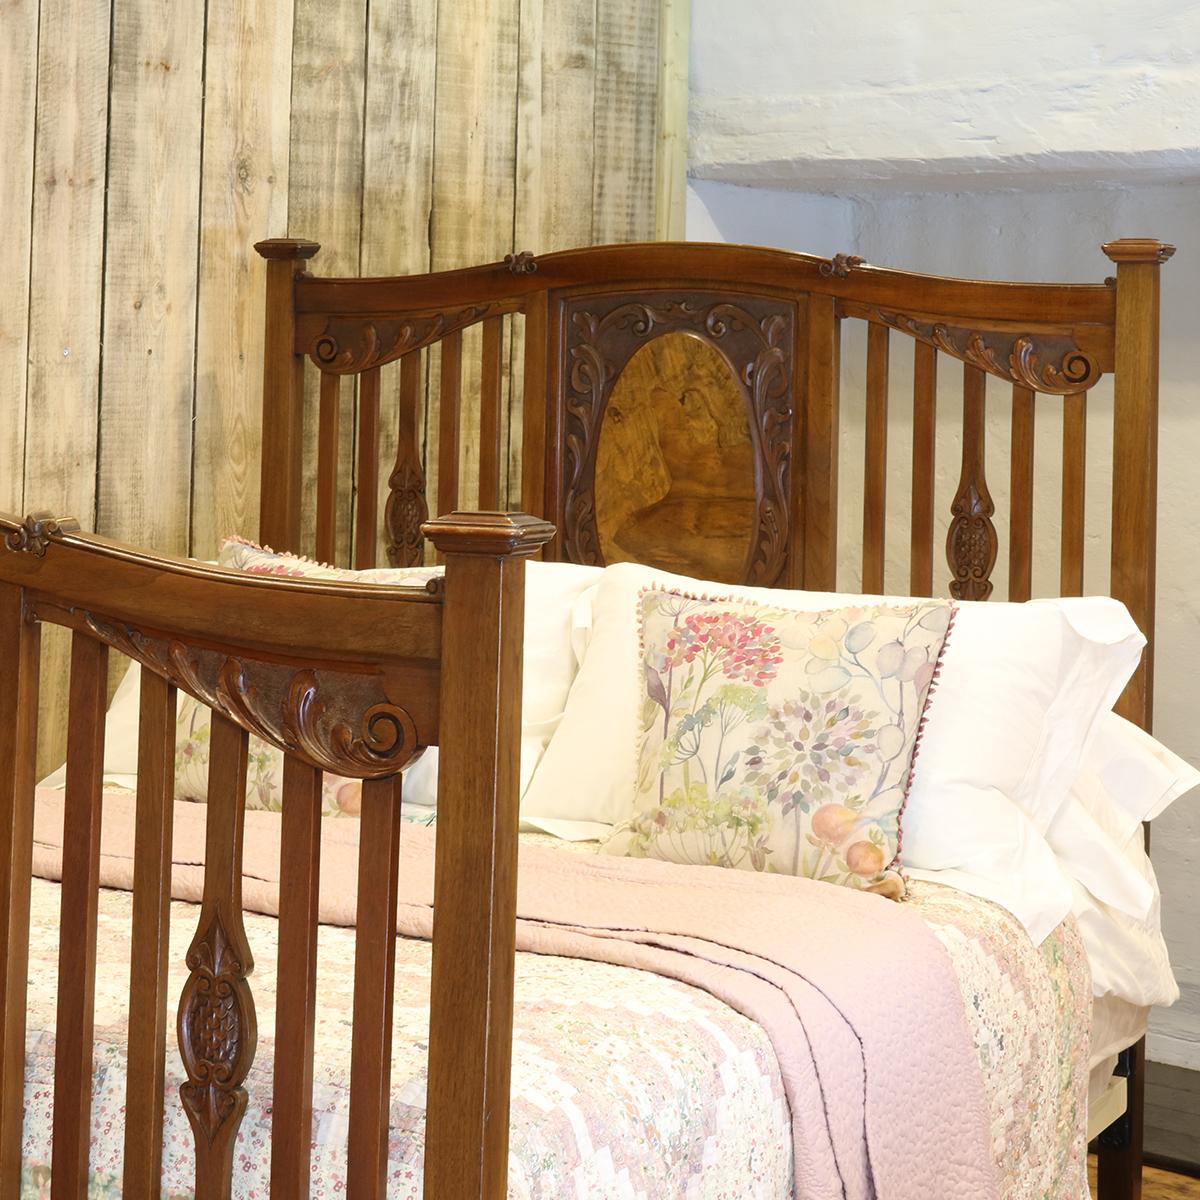 A handsome mahogany Edwardian antique bed with slatted and burr wood panels. 

This bed accepts a double size (54 inches wide) base and mattress set.

The price includes a standard firm bed base to support the mattress. 

The mattress, bedding and